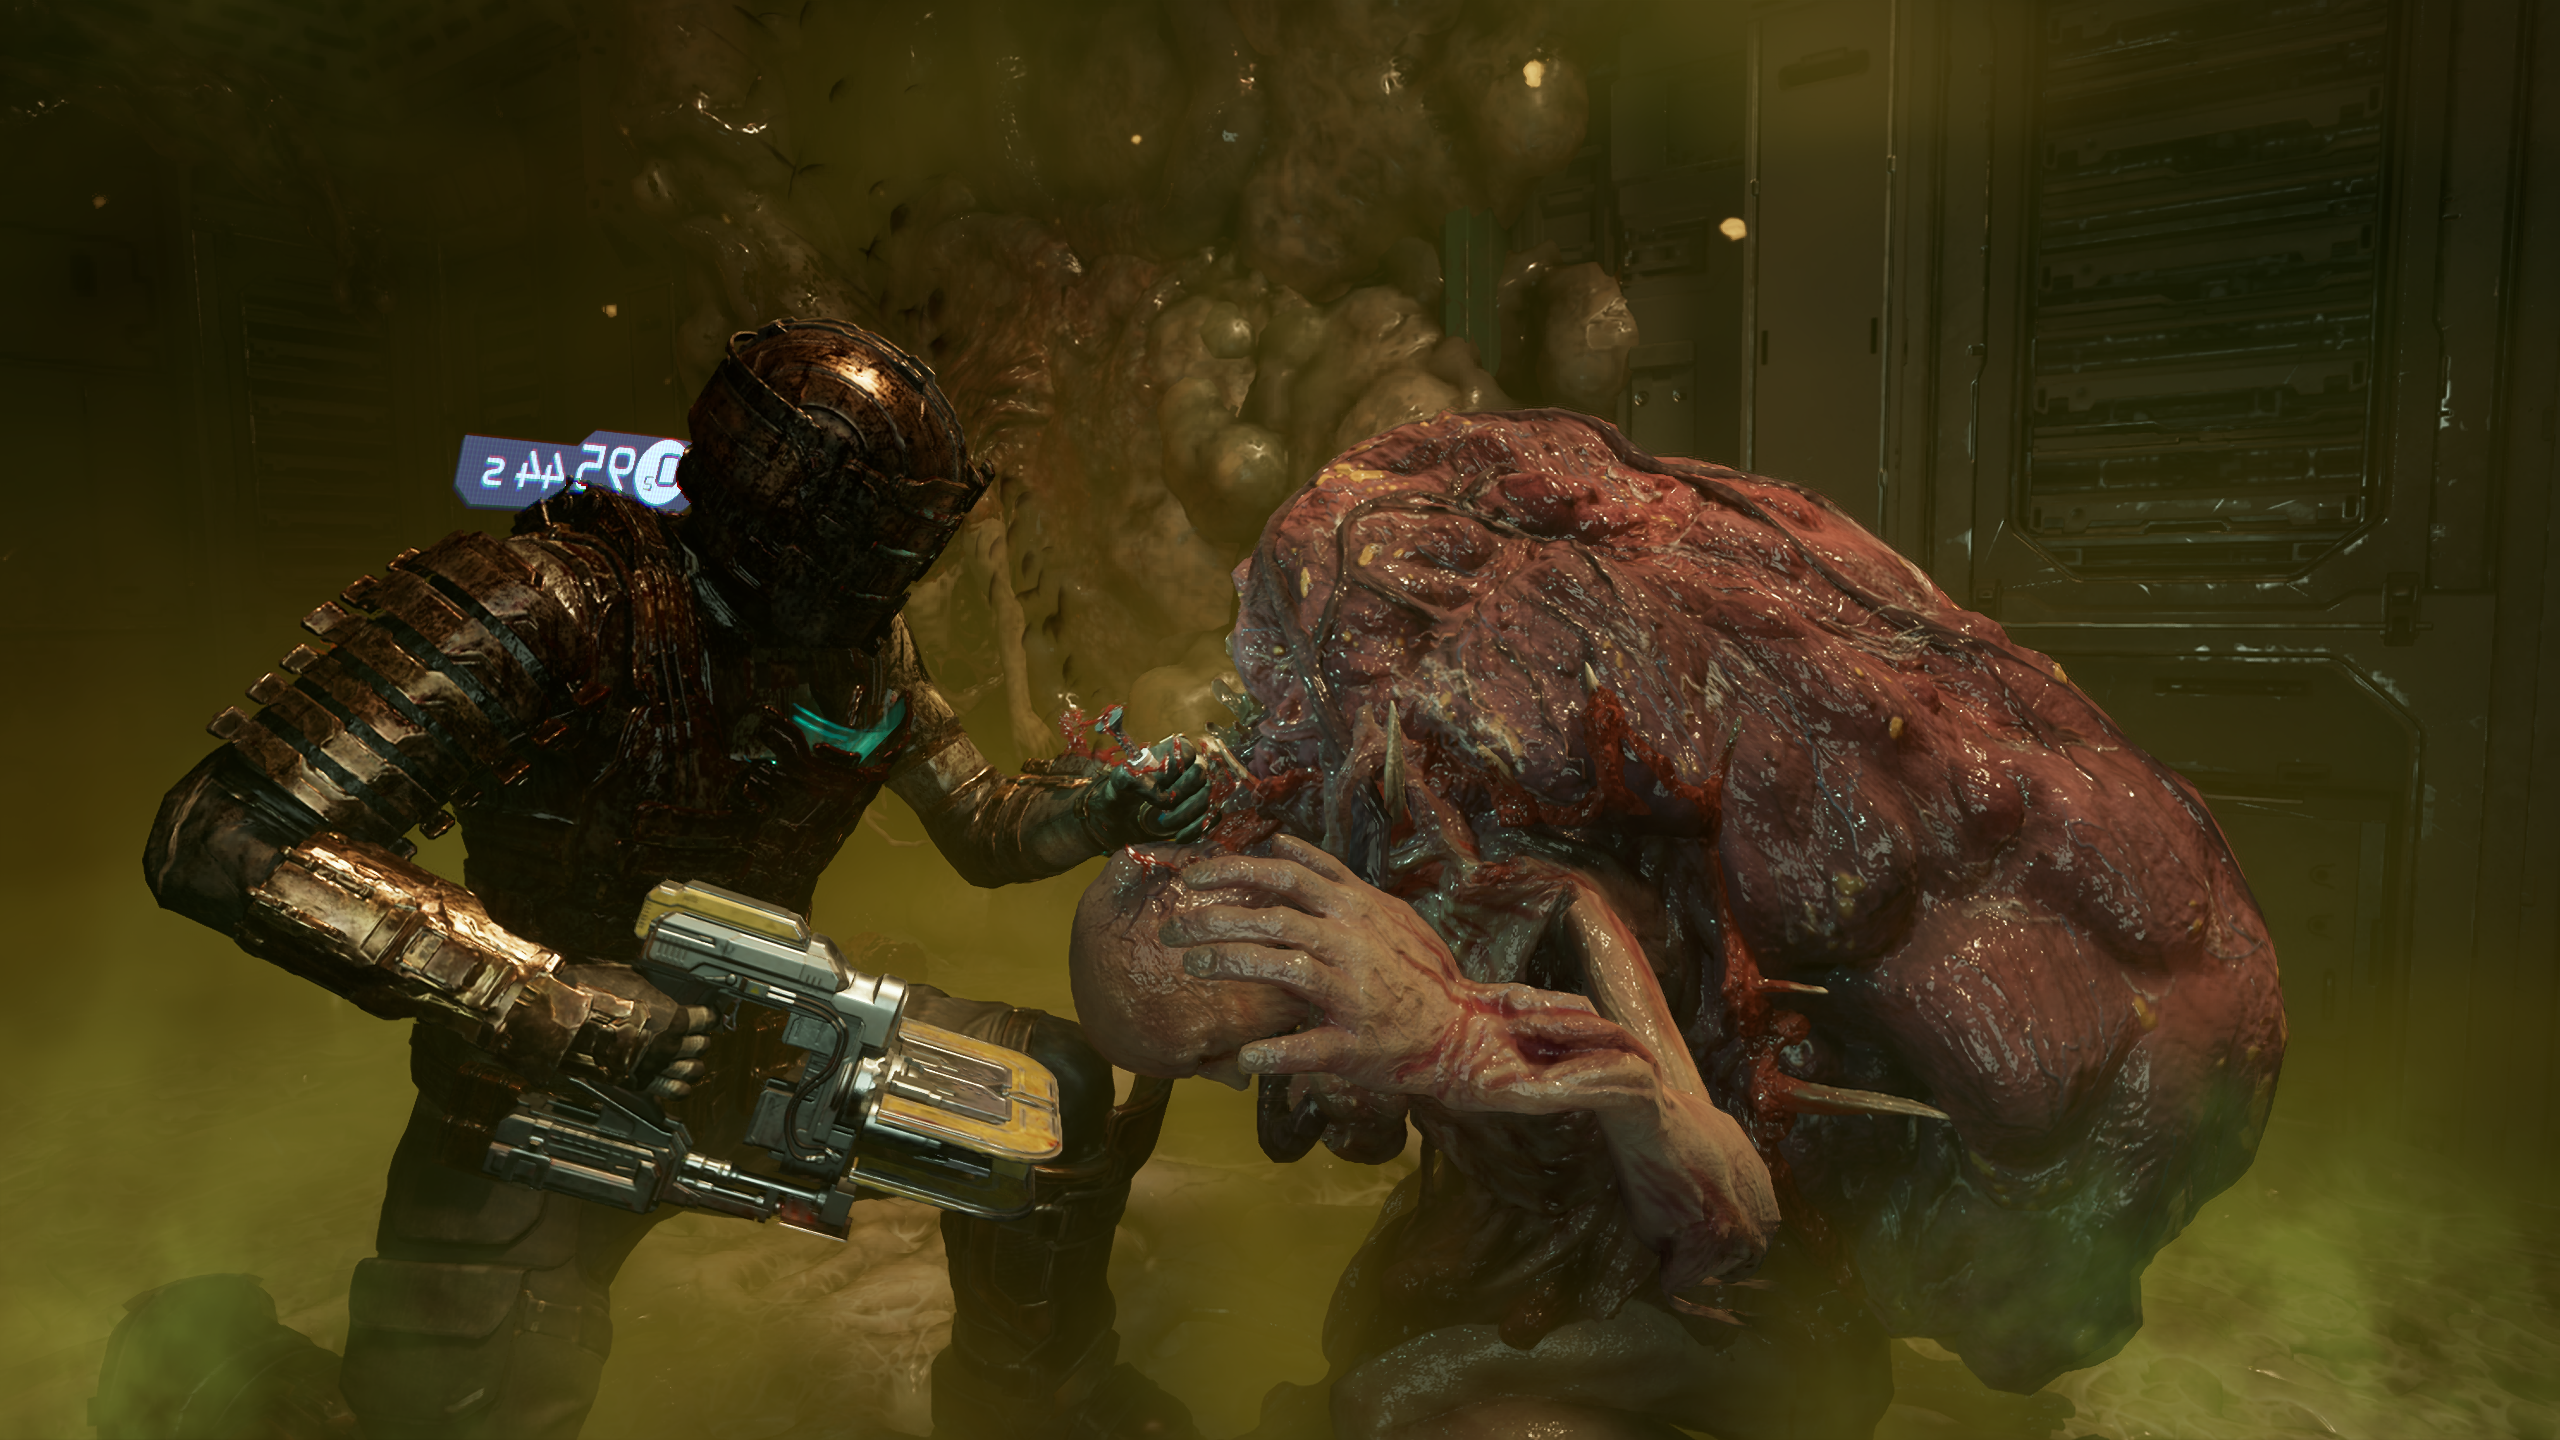 Dead space rig fallout 4 фото 68